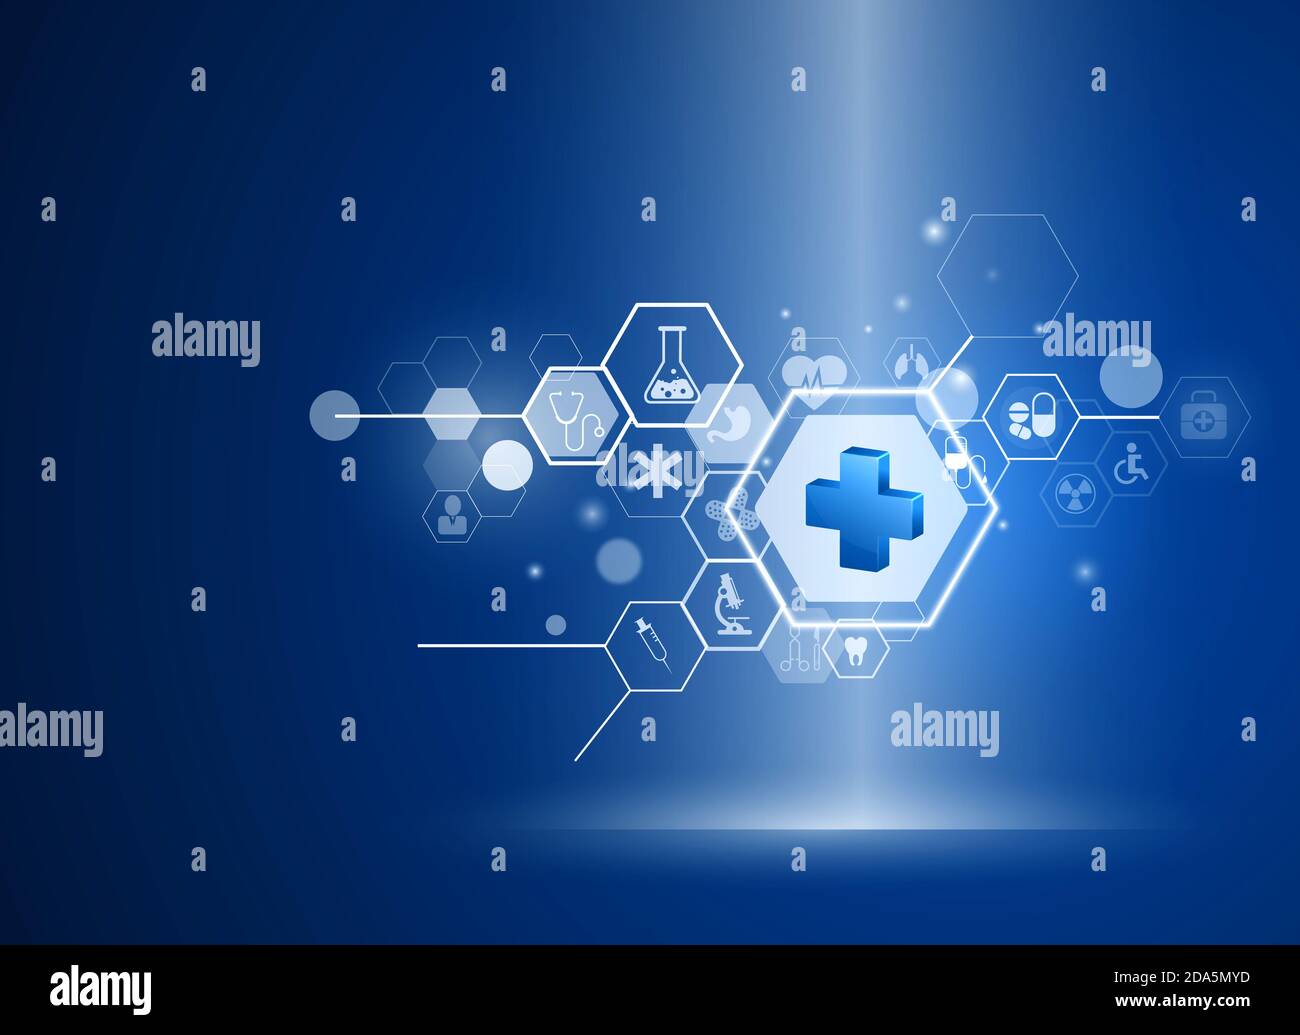 illustration. medical health care science innovation concept pattern background. Stock Photo